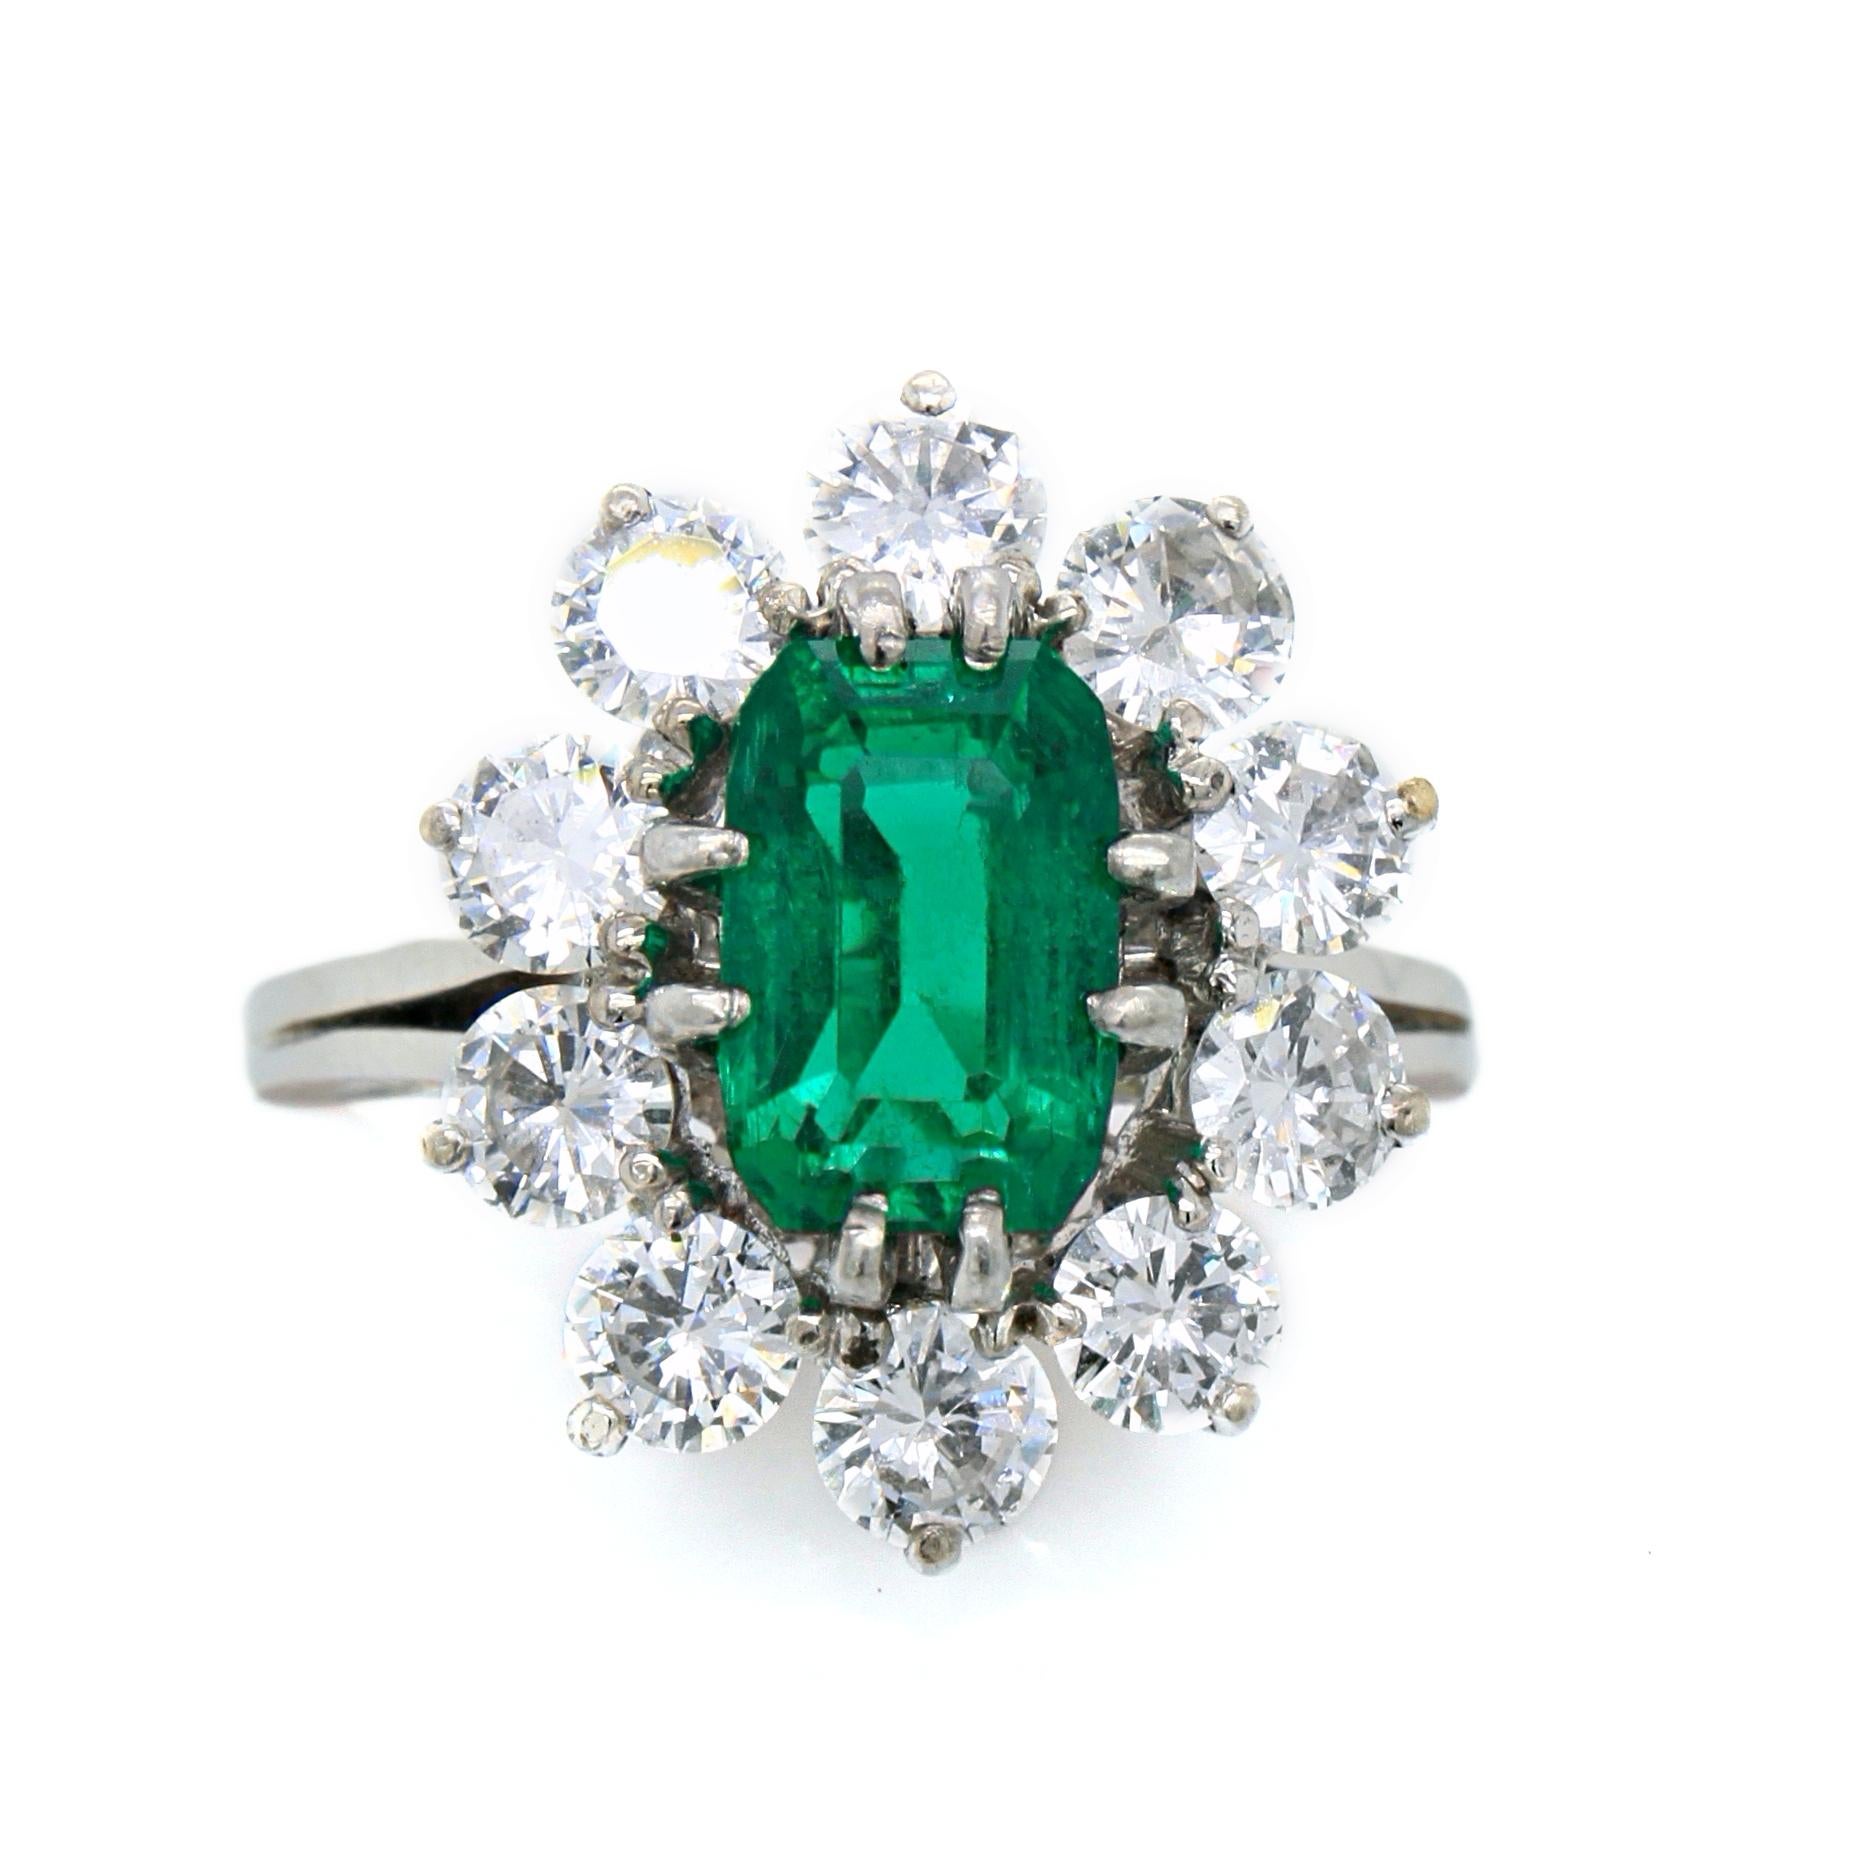 A French emerald and diamond ring in platinum and 18k. 

The centre emerald weighs 1.88 carats and is of Columbian origin and Minor Oil, accompanied by a gemological certificate. It has as a vivid deep green colour, very clear crystal and no eye